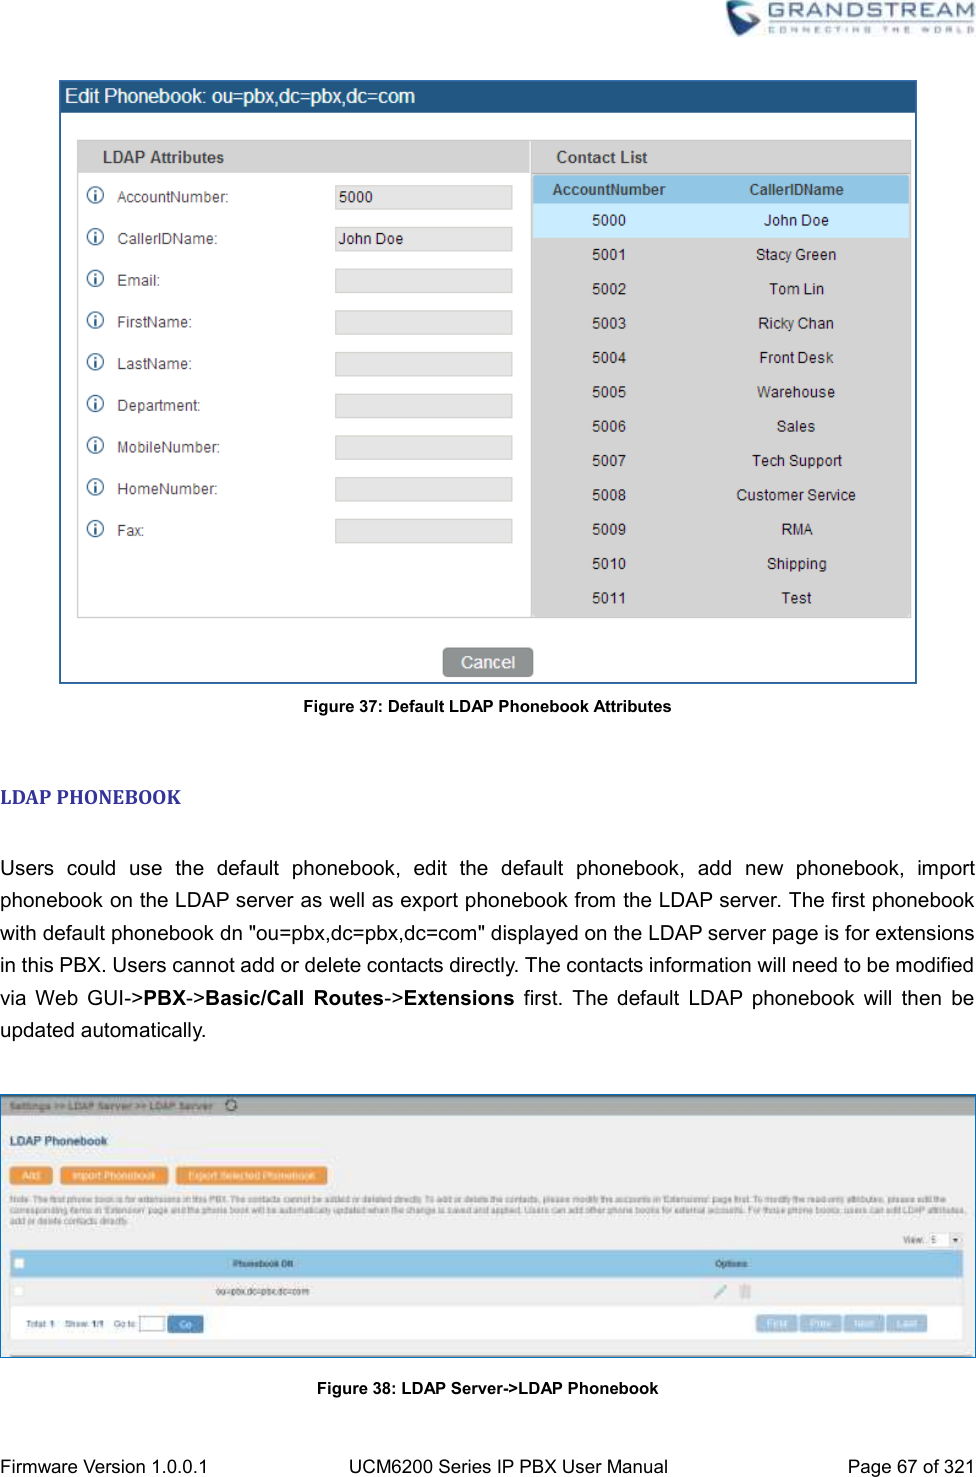  Firmware Version 1.0.0.1 UCM6200 Series IP PBX User Manual Page 67 of 321     Figure 37: Default LDAP Phonebook Attributes  LDAP PHONEBOOK  Users  could  use  the  default  phonebook,  edit  the  default  phonebook,  add  new  phonebook,  import phonebook on the LDAP server as well as export phonebook from the LDAP server. The first phonebook with default phonebook dn &quot;ou=pbx,dc=pbx,dc=com&quot; displayed on the LDAP server page is for extensions in this PBX. Users cannot add or delete contacts directly. The contacts information will need to be modified via  Web  GUI-&gt;PBX-&gt;Basic/Call  Routes-&gt;Extensions  first.  The  default  LDAP  phonebook  will  then  be updated automatically.   Figure 38: LDAP Server-&gt;LDAP Phonebook 